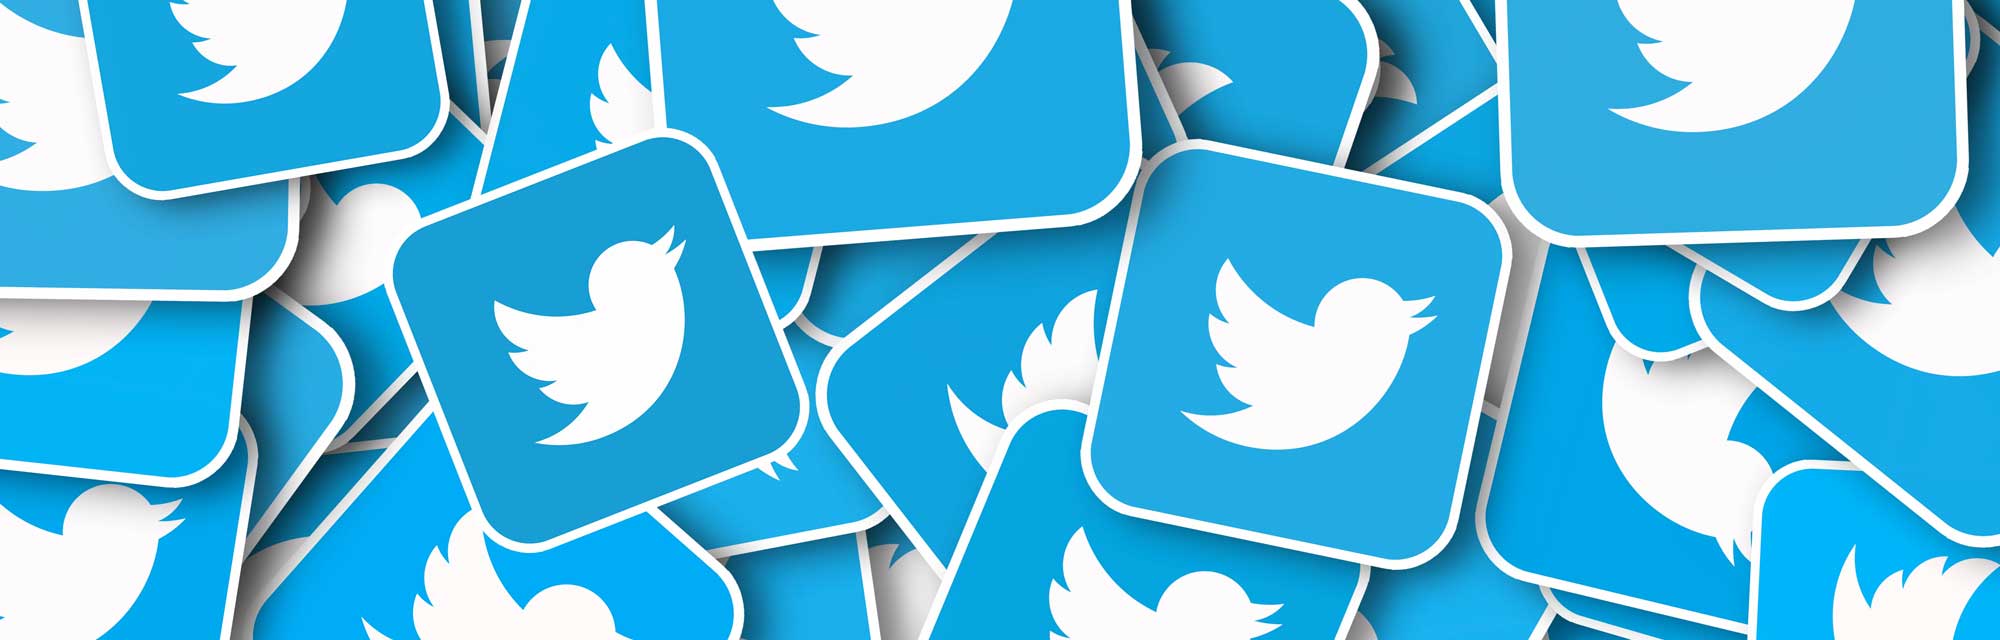 6 Surprising Twitter Stats - Is Twitter Really That Big?